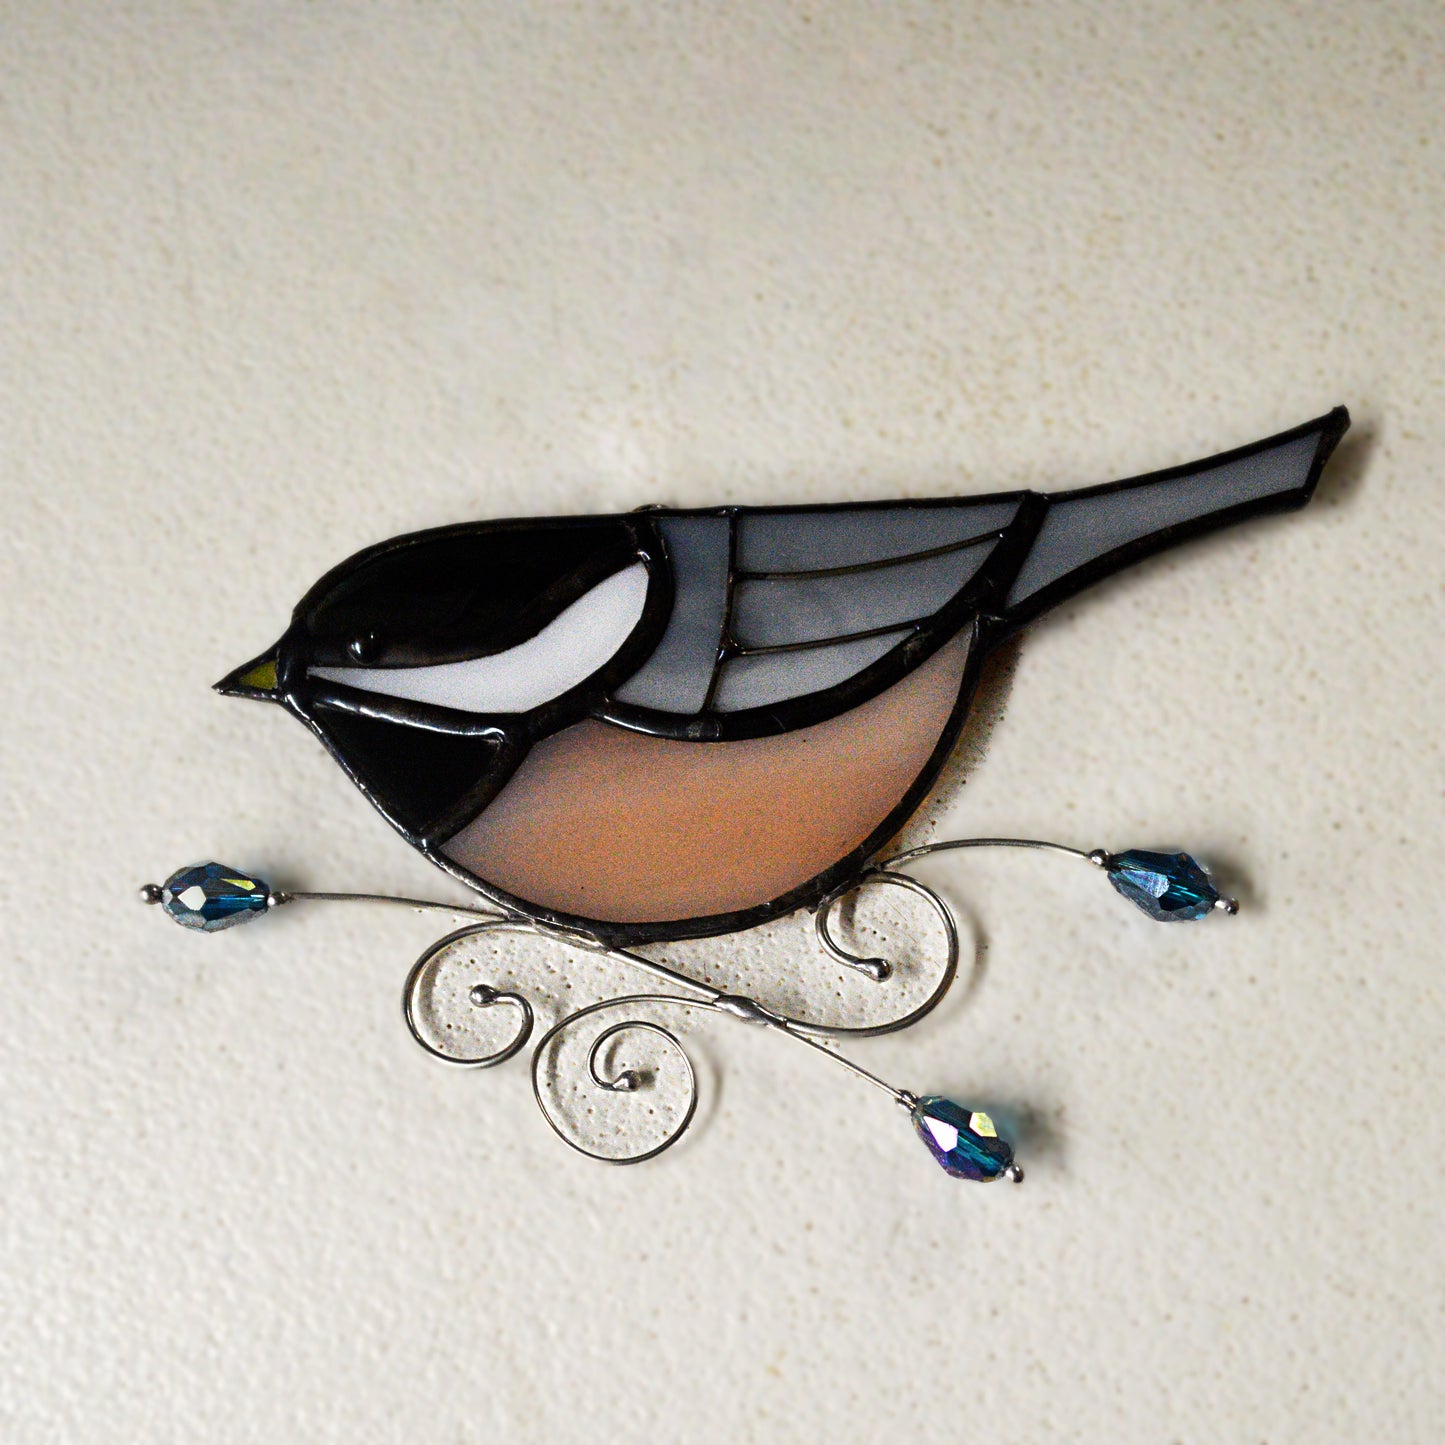 This adorable chickadee stained glass suncatcher is a great for window decoration, as a gift and more! Hang it up in your window to see the full beauty of the stained glass, add it to a floral arraignment, or use it as a gift for the nature lover in your life.   All stained glass is handmade by Deb's Broken glass in Bathurst NB. 